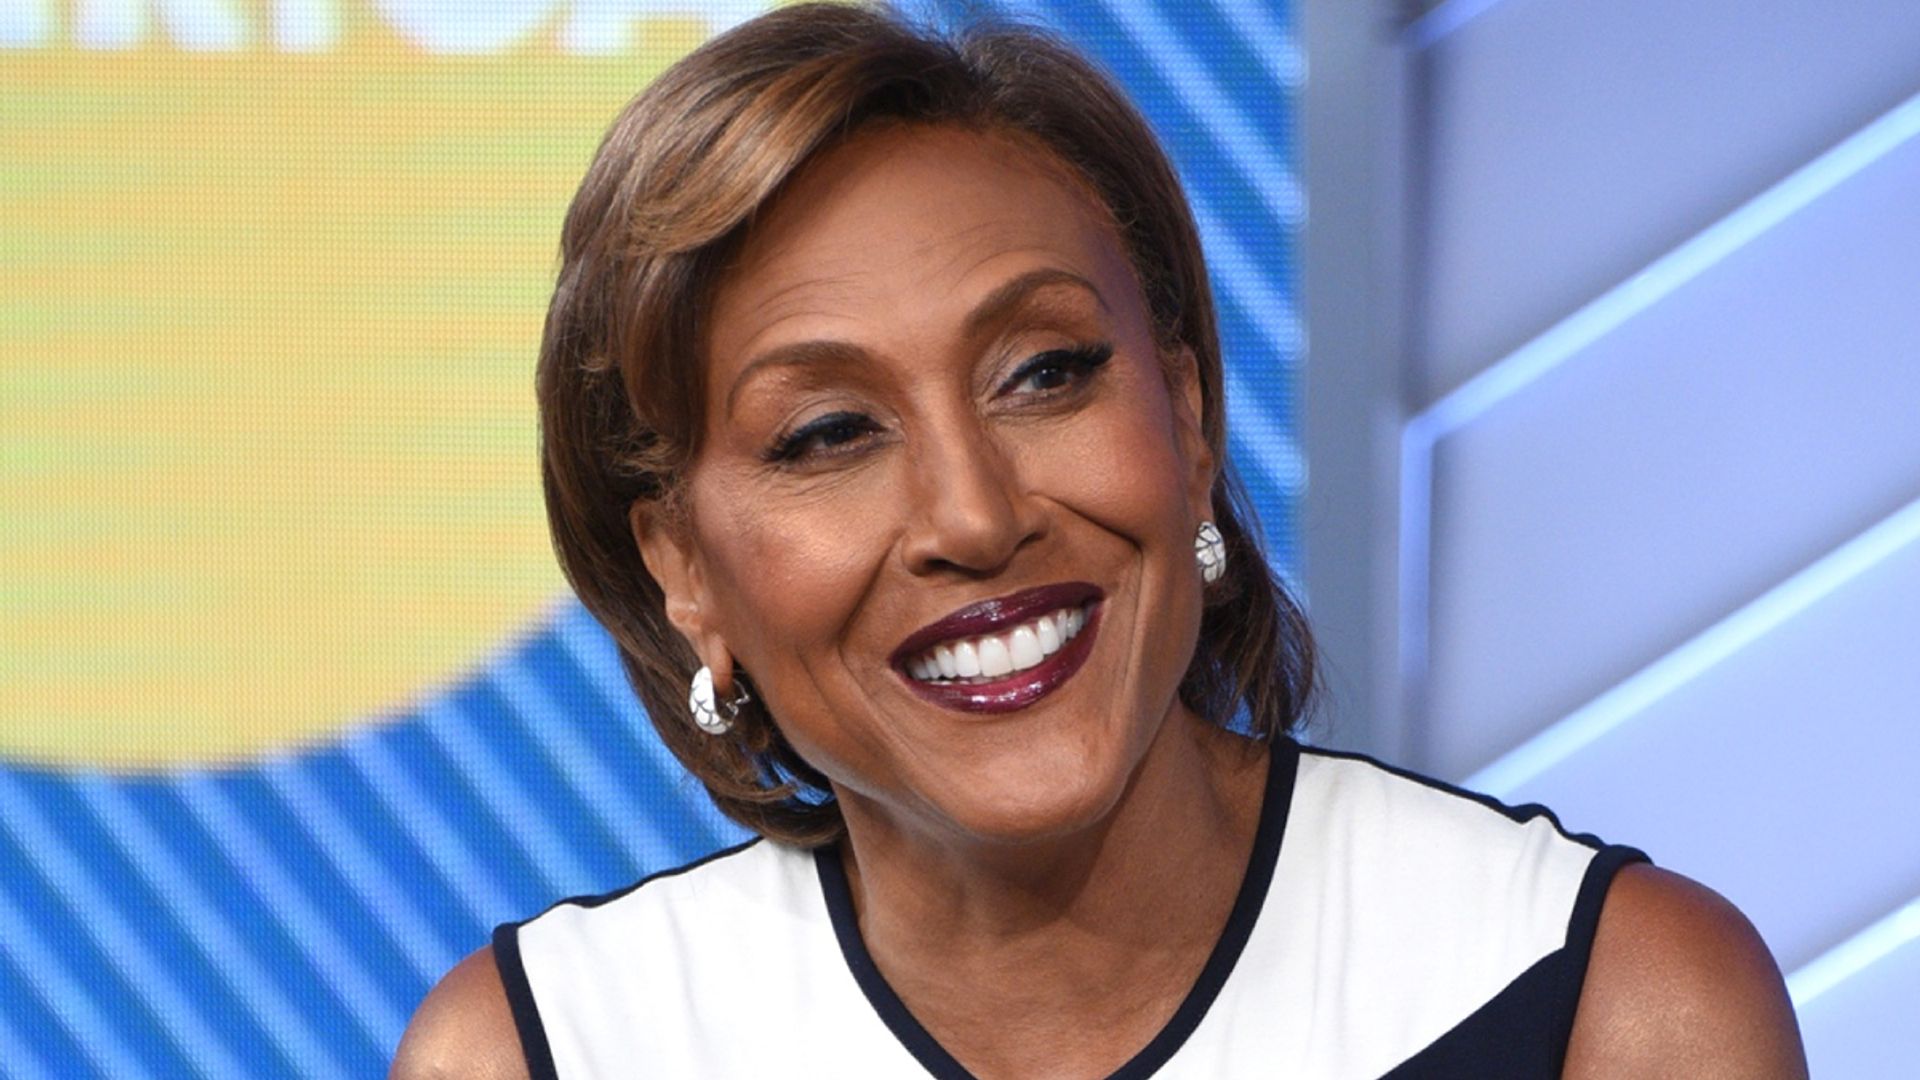 Robin Roberts Takes Relaxing Break From Gma For Family Time Flipboard